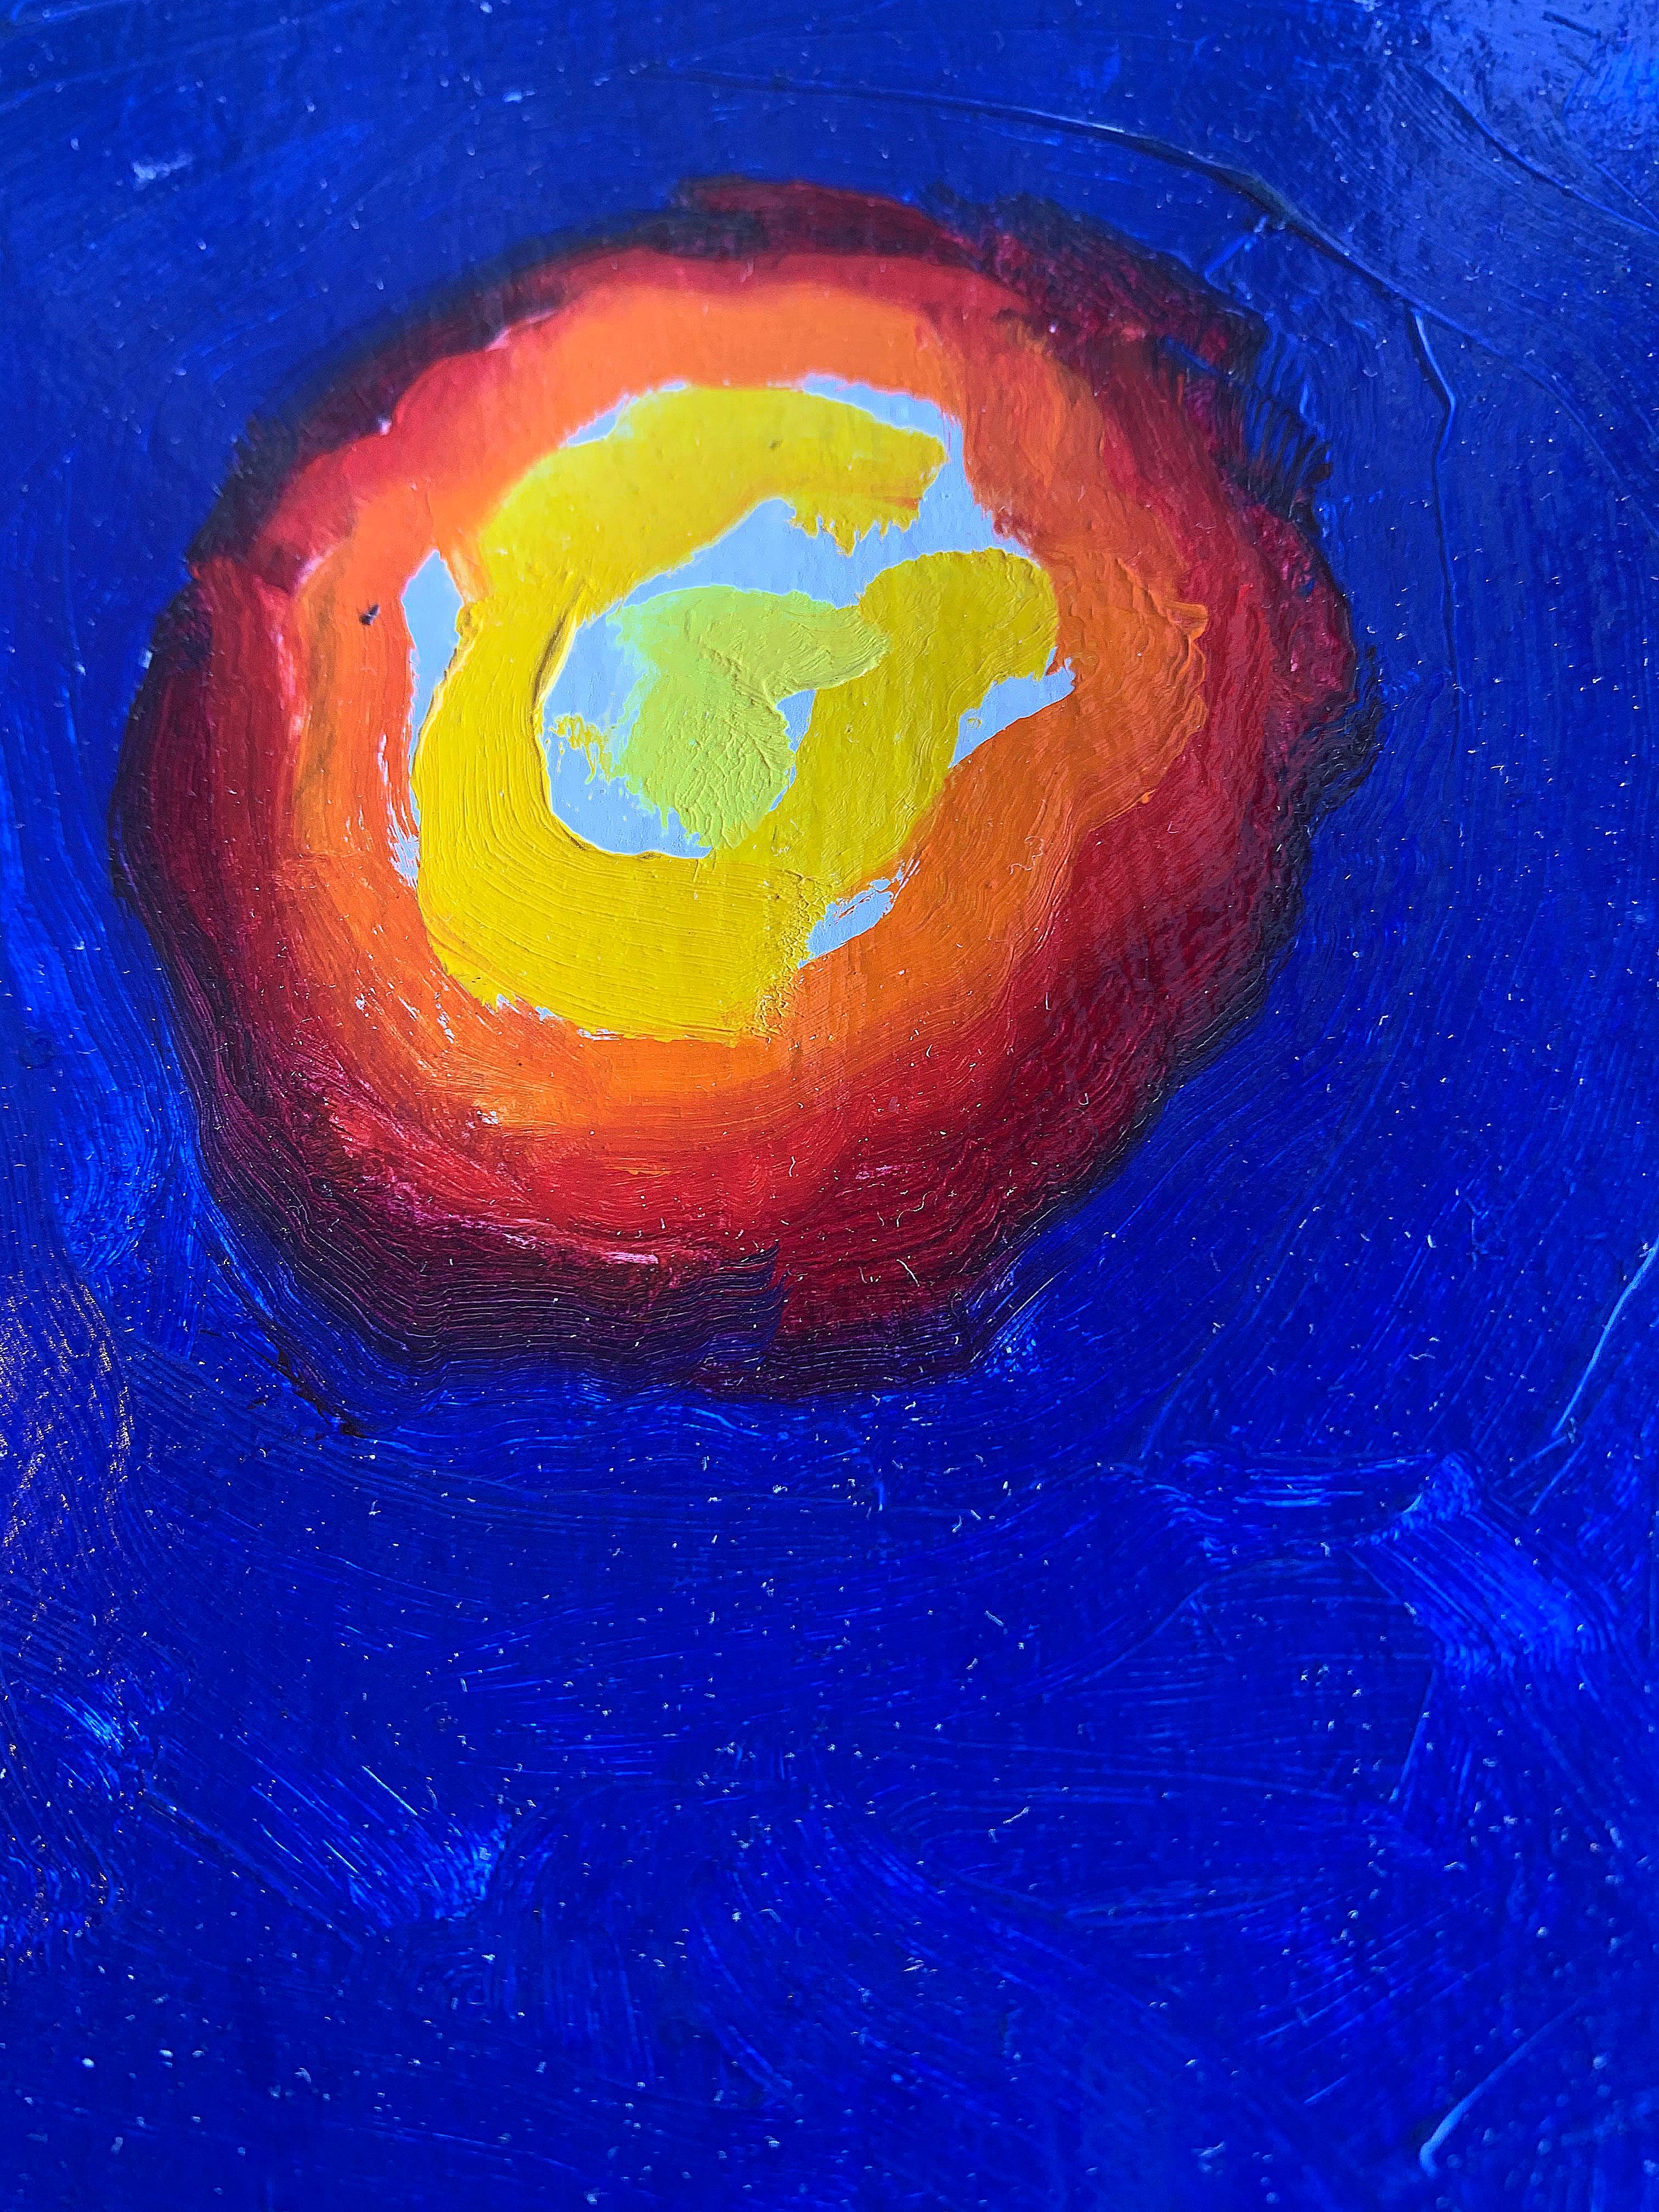 Untitled, Red Orange Yellow Circle on Blue - Painting by Conrad Buff